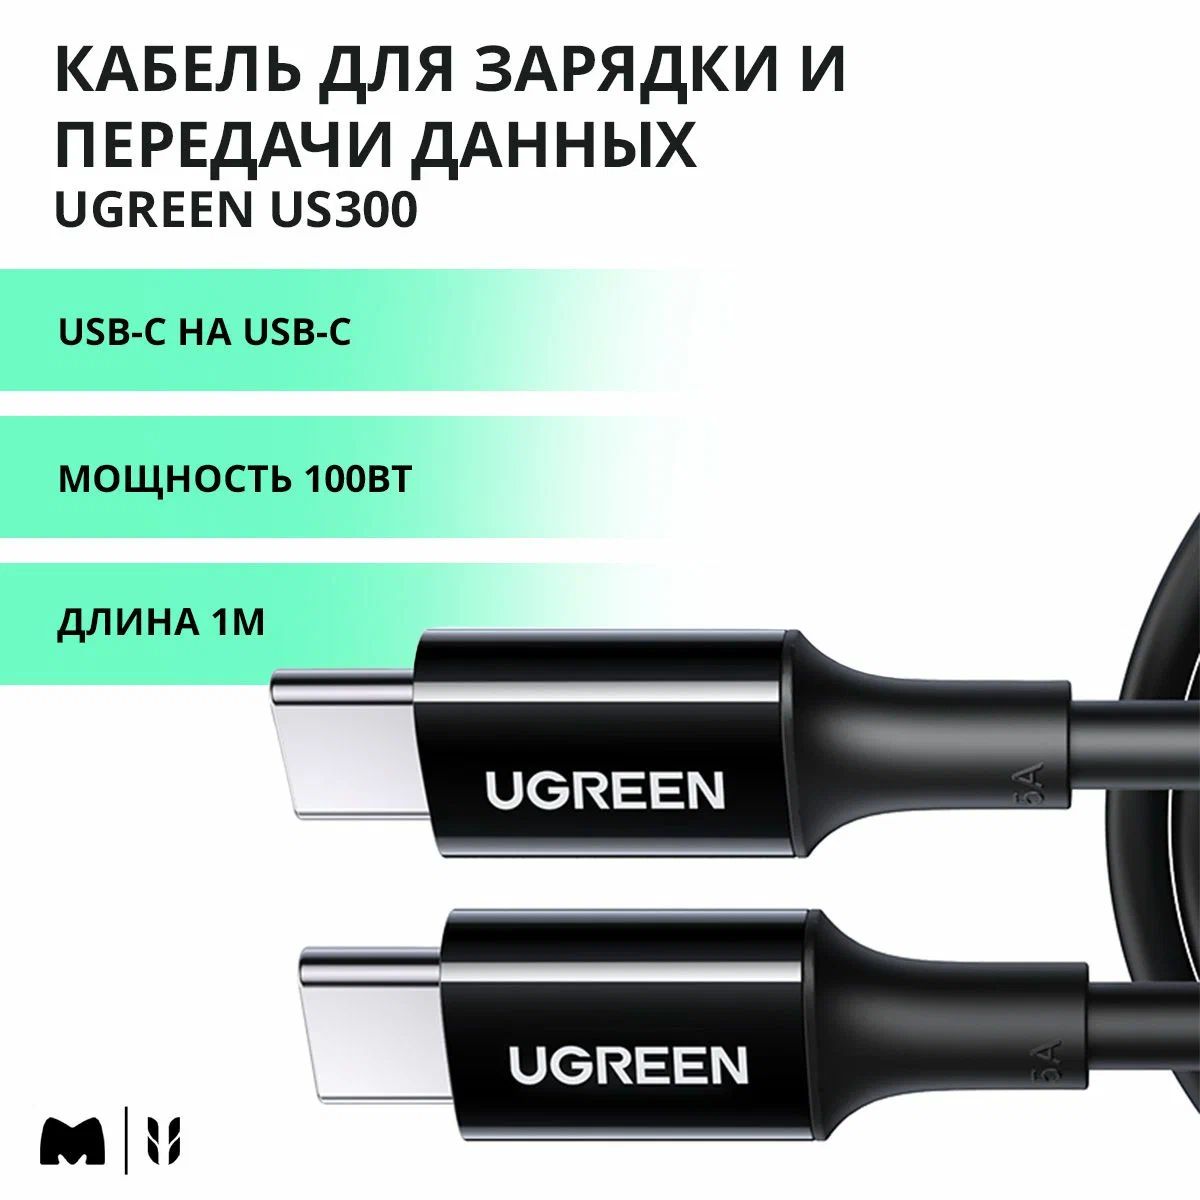 Кабель UGREEN Type-C Male to Type-C Male 2.0 ABS Shell 5A Current, длина 1м, цвет черный (80371) кабель ugreen us300 80369 type c male to type c male 2 0 abs shell 5a current 0 5м белый